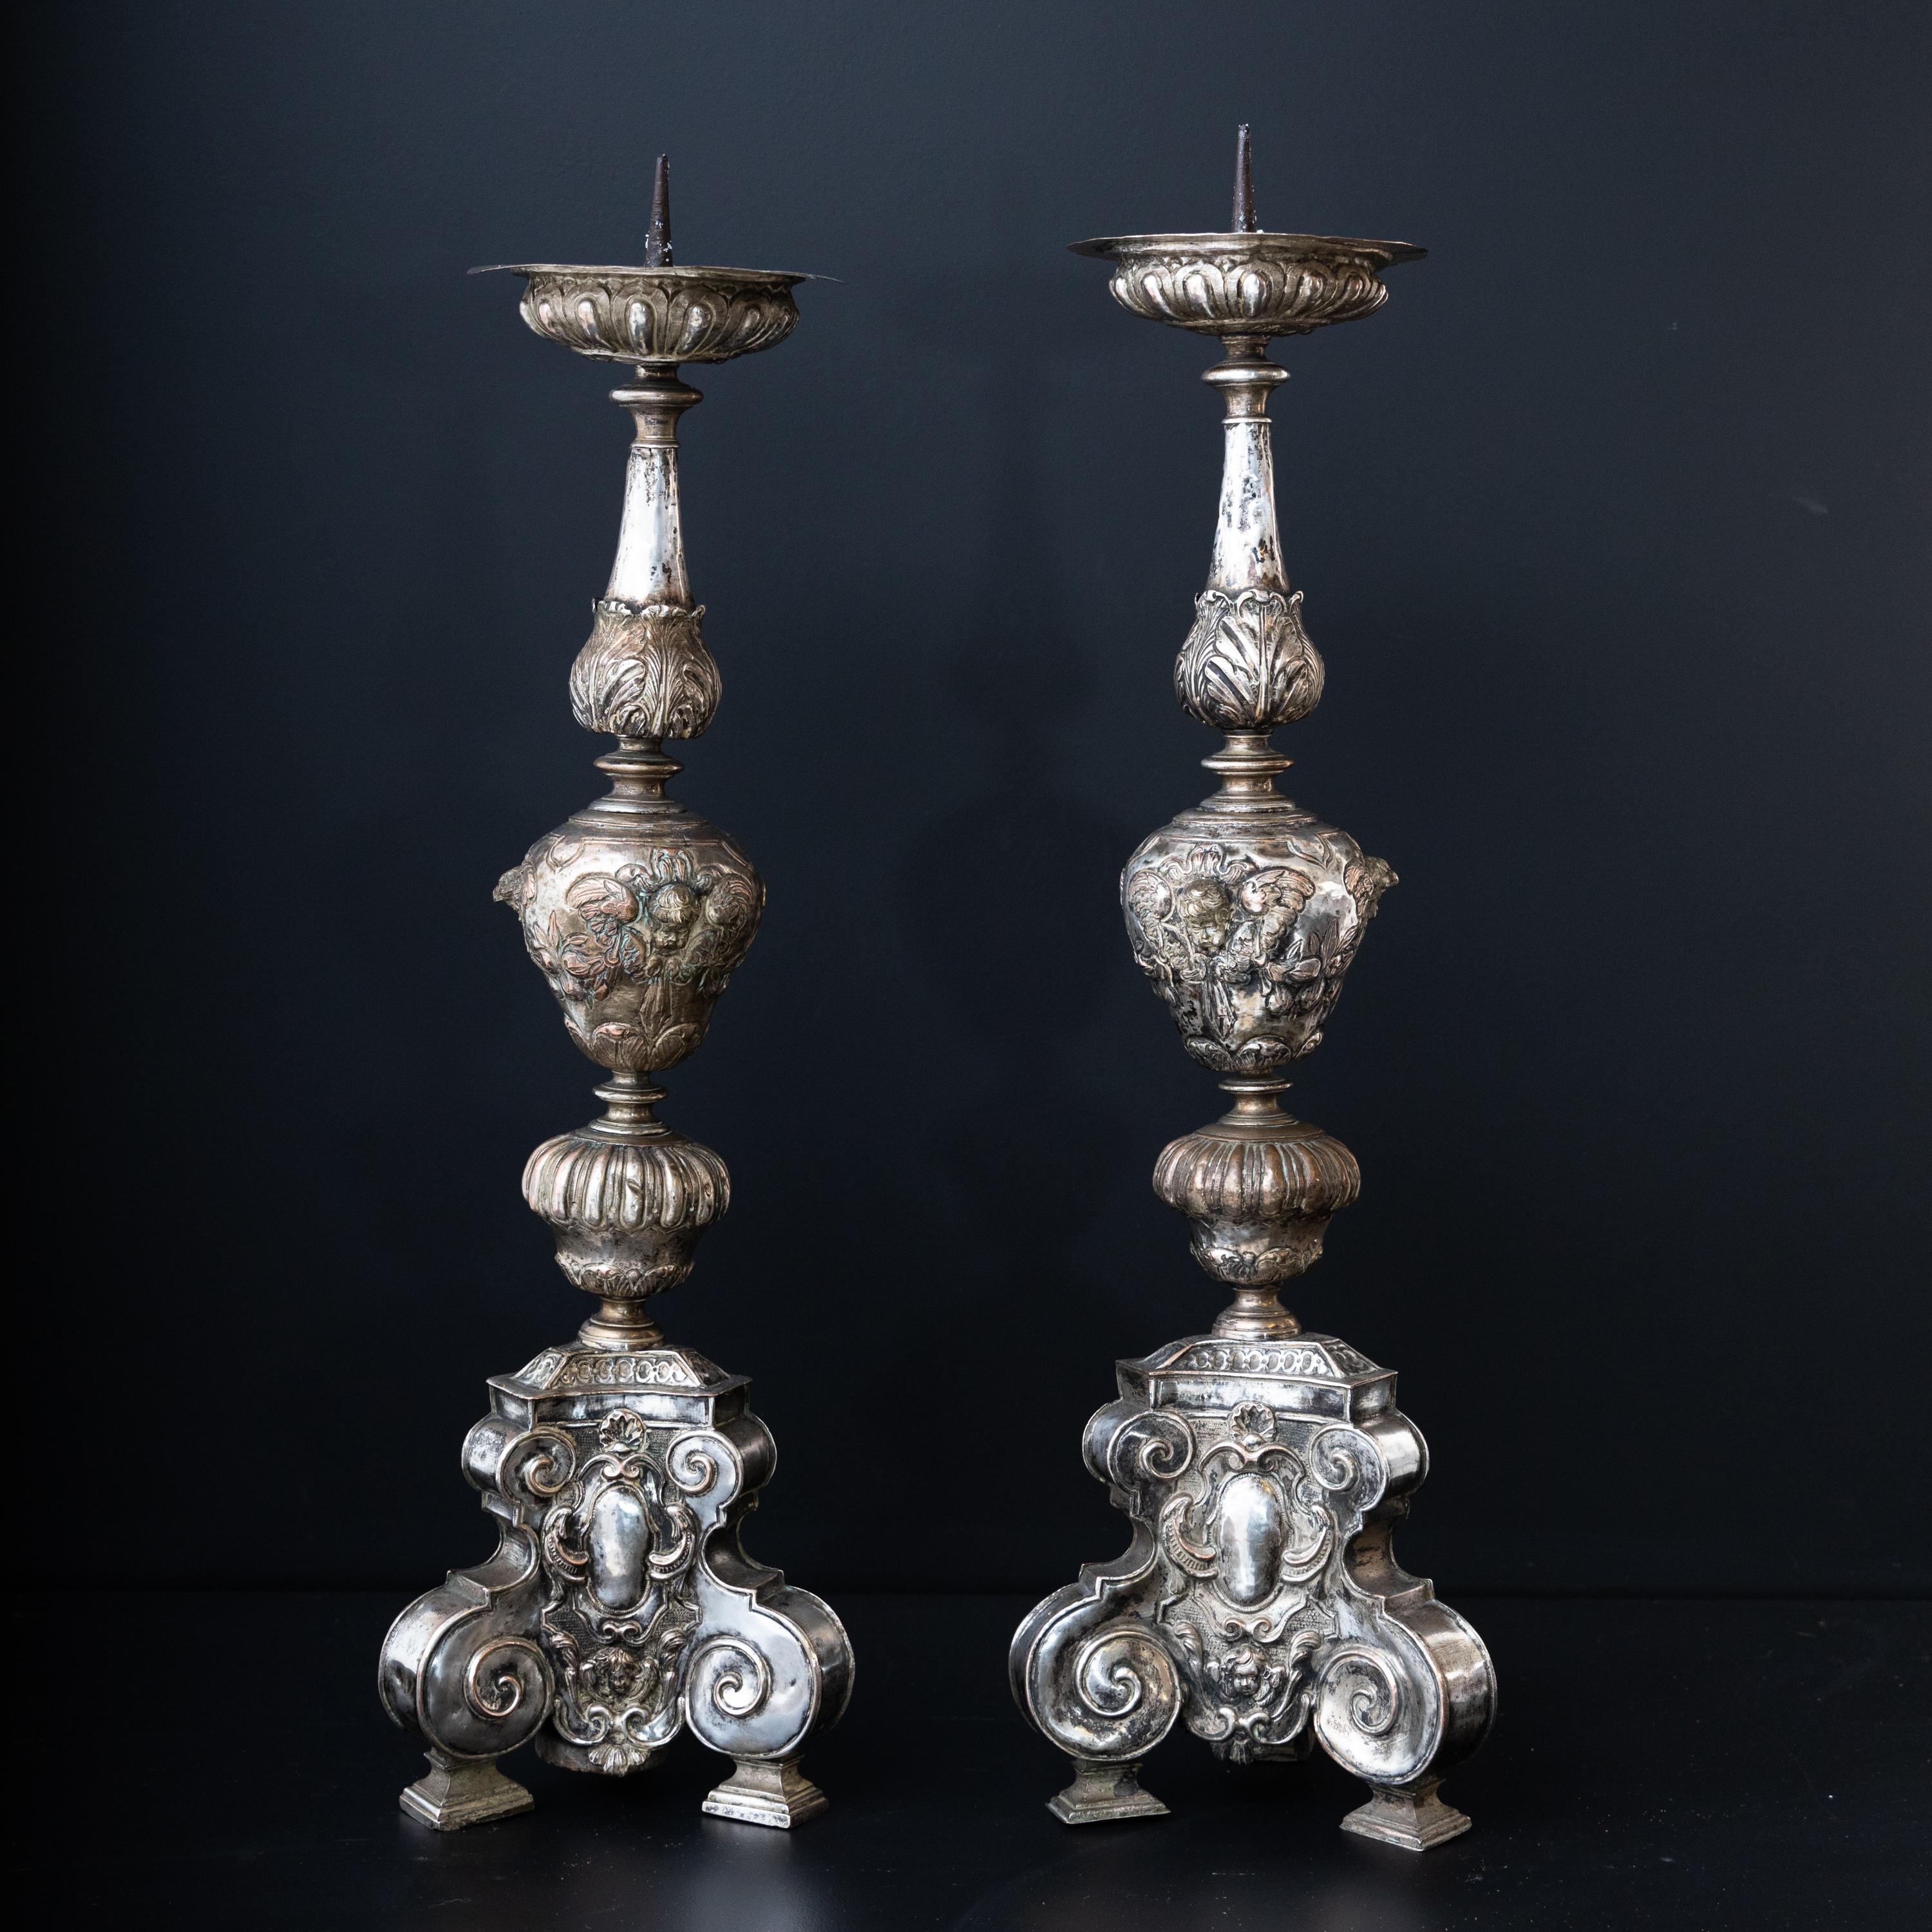 Pair of silver-plated altar candlesticks with putti decoration and elaborately balustraded shafts. The diameter of the drip tray is 10cm.